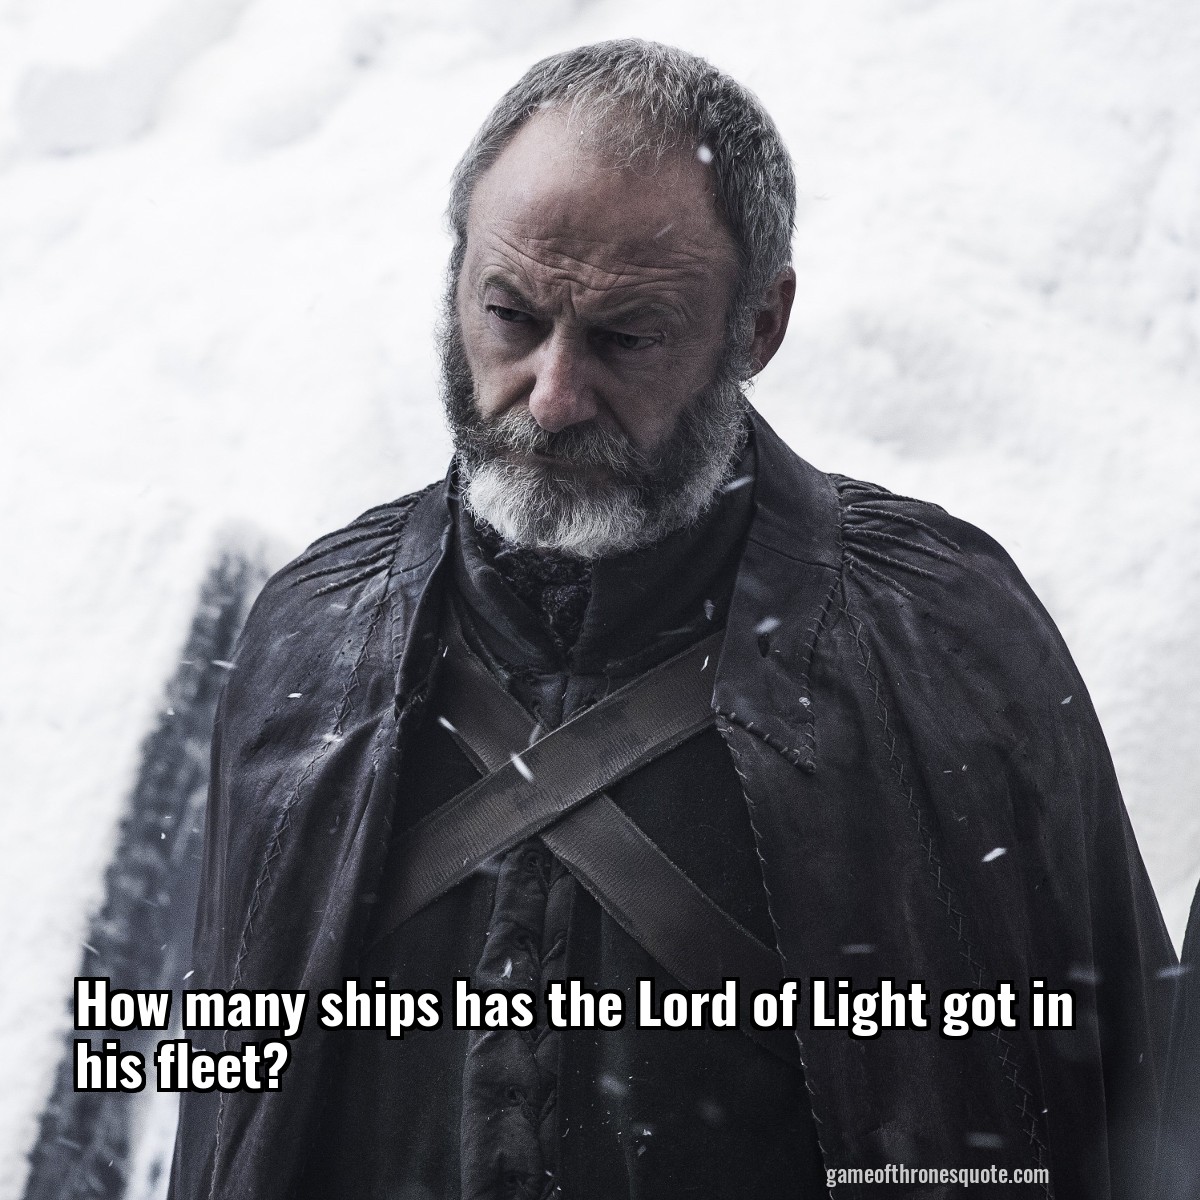 How many ships has the Lord of Light got in his fleet?